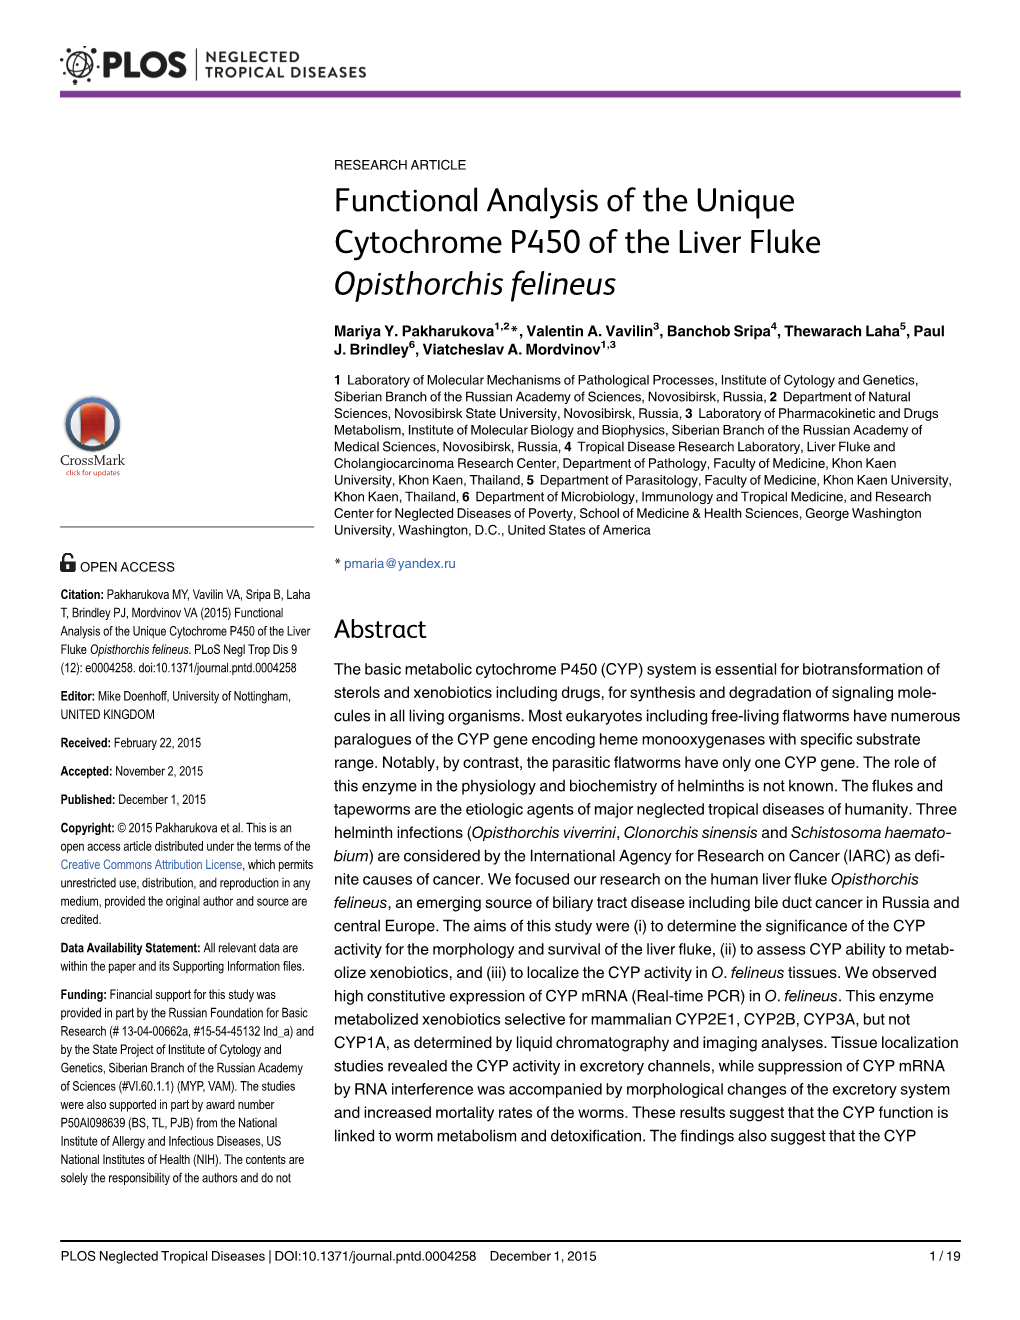 Functional Analysis of the Unique Cytochrome P450 of the Liver Fluke Opisthorchis Felineus